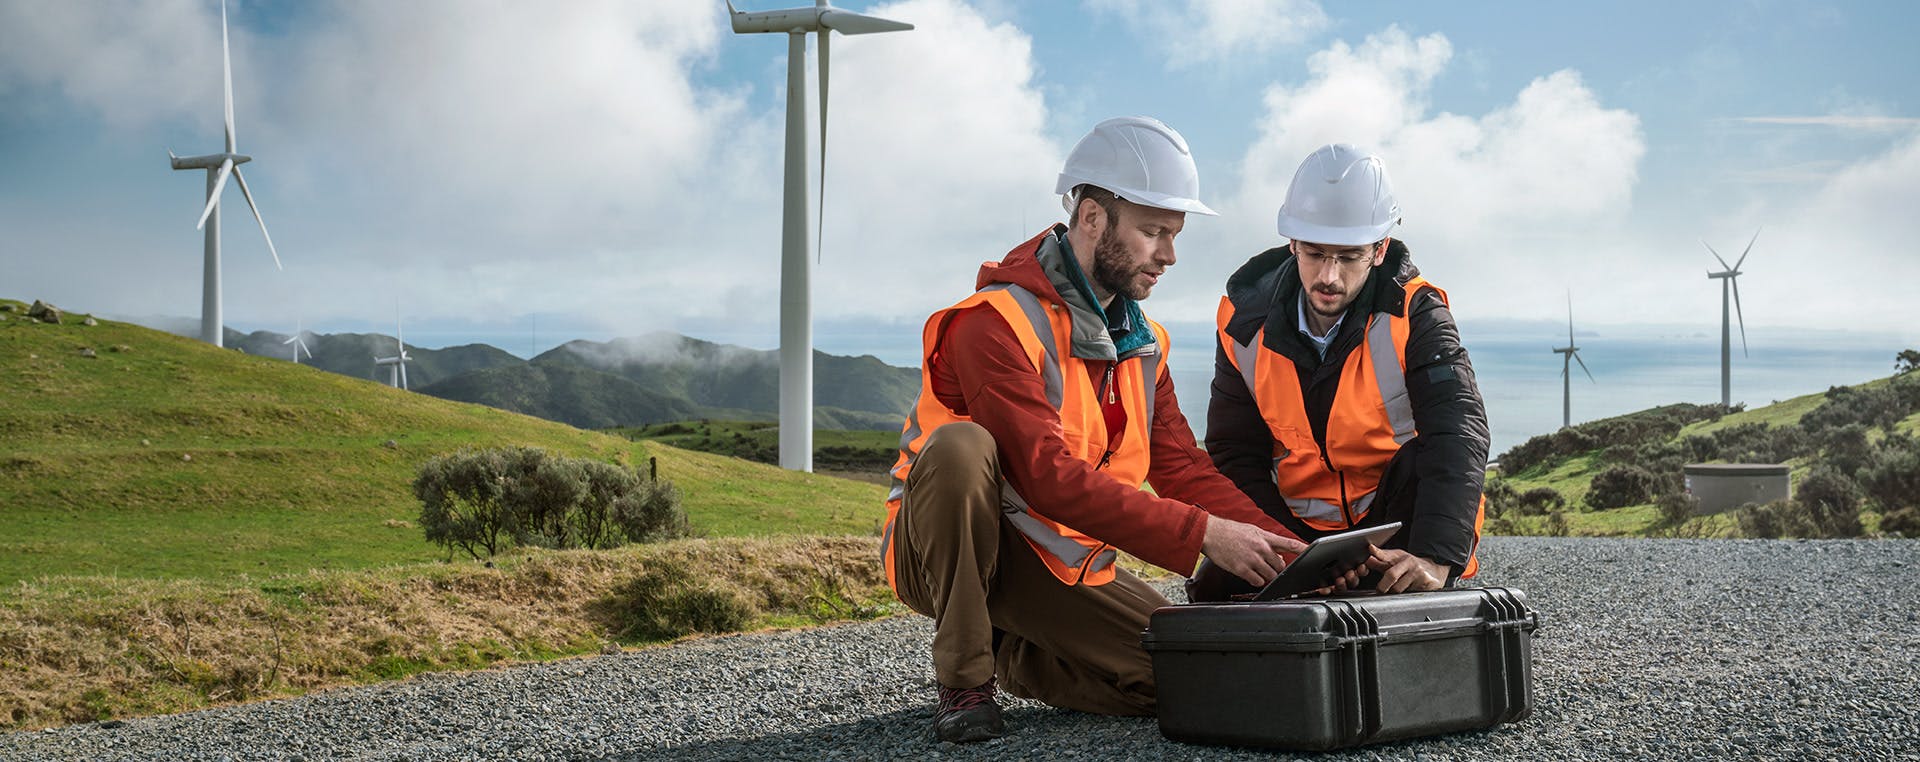 Engineering students work on a tablet, on site at a wind farm.